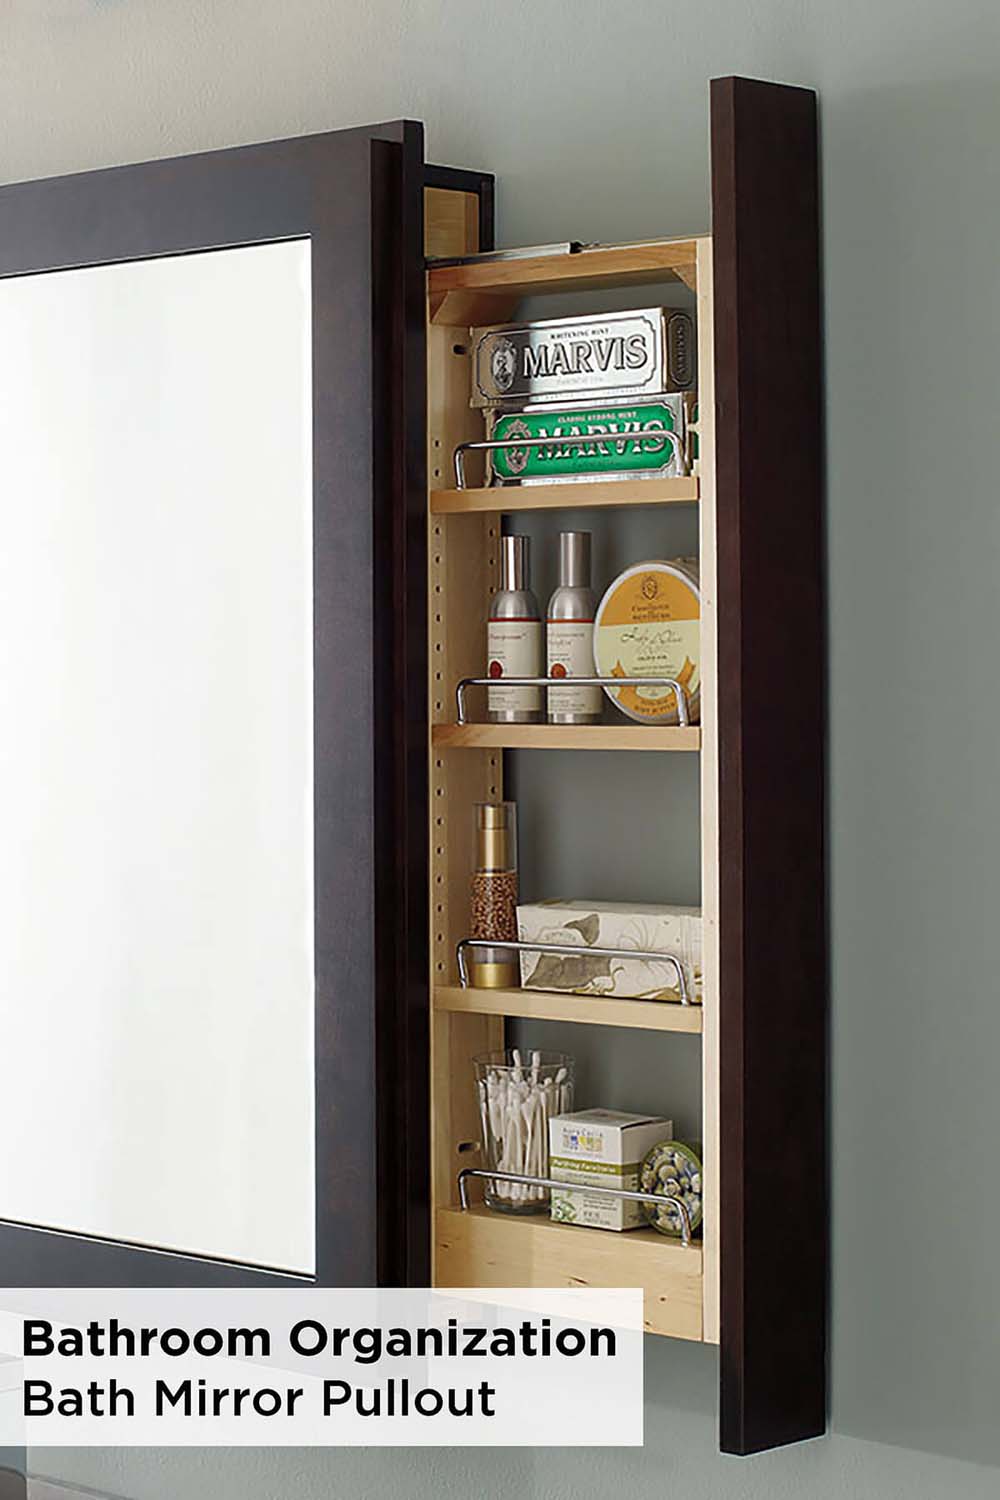 Built-in Shelves In The Mirror